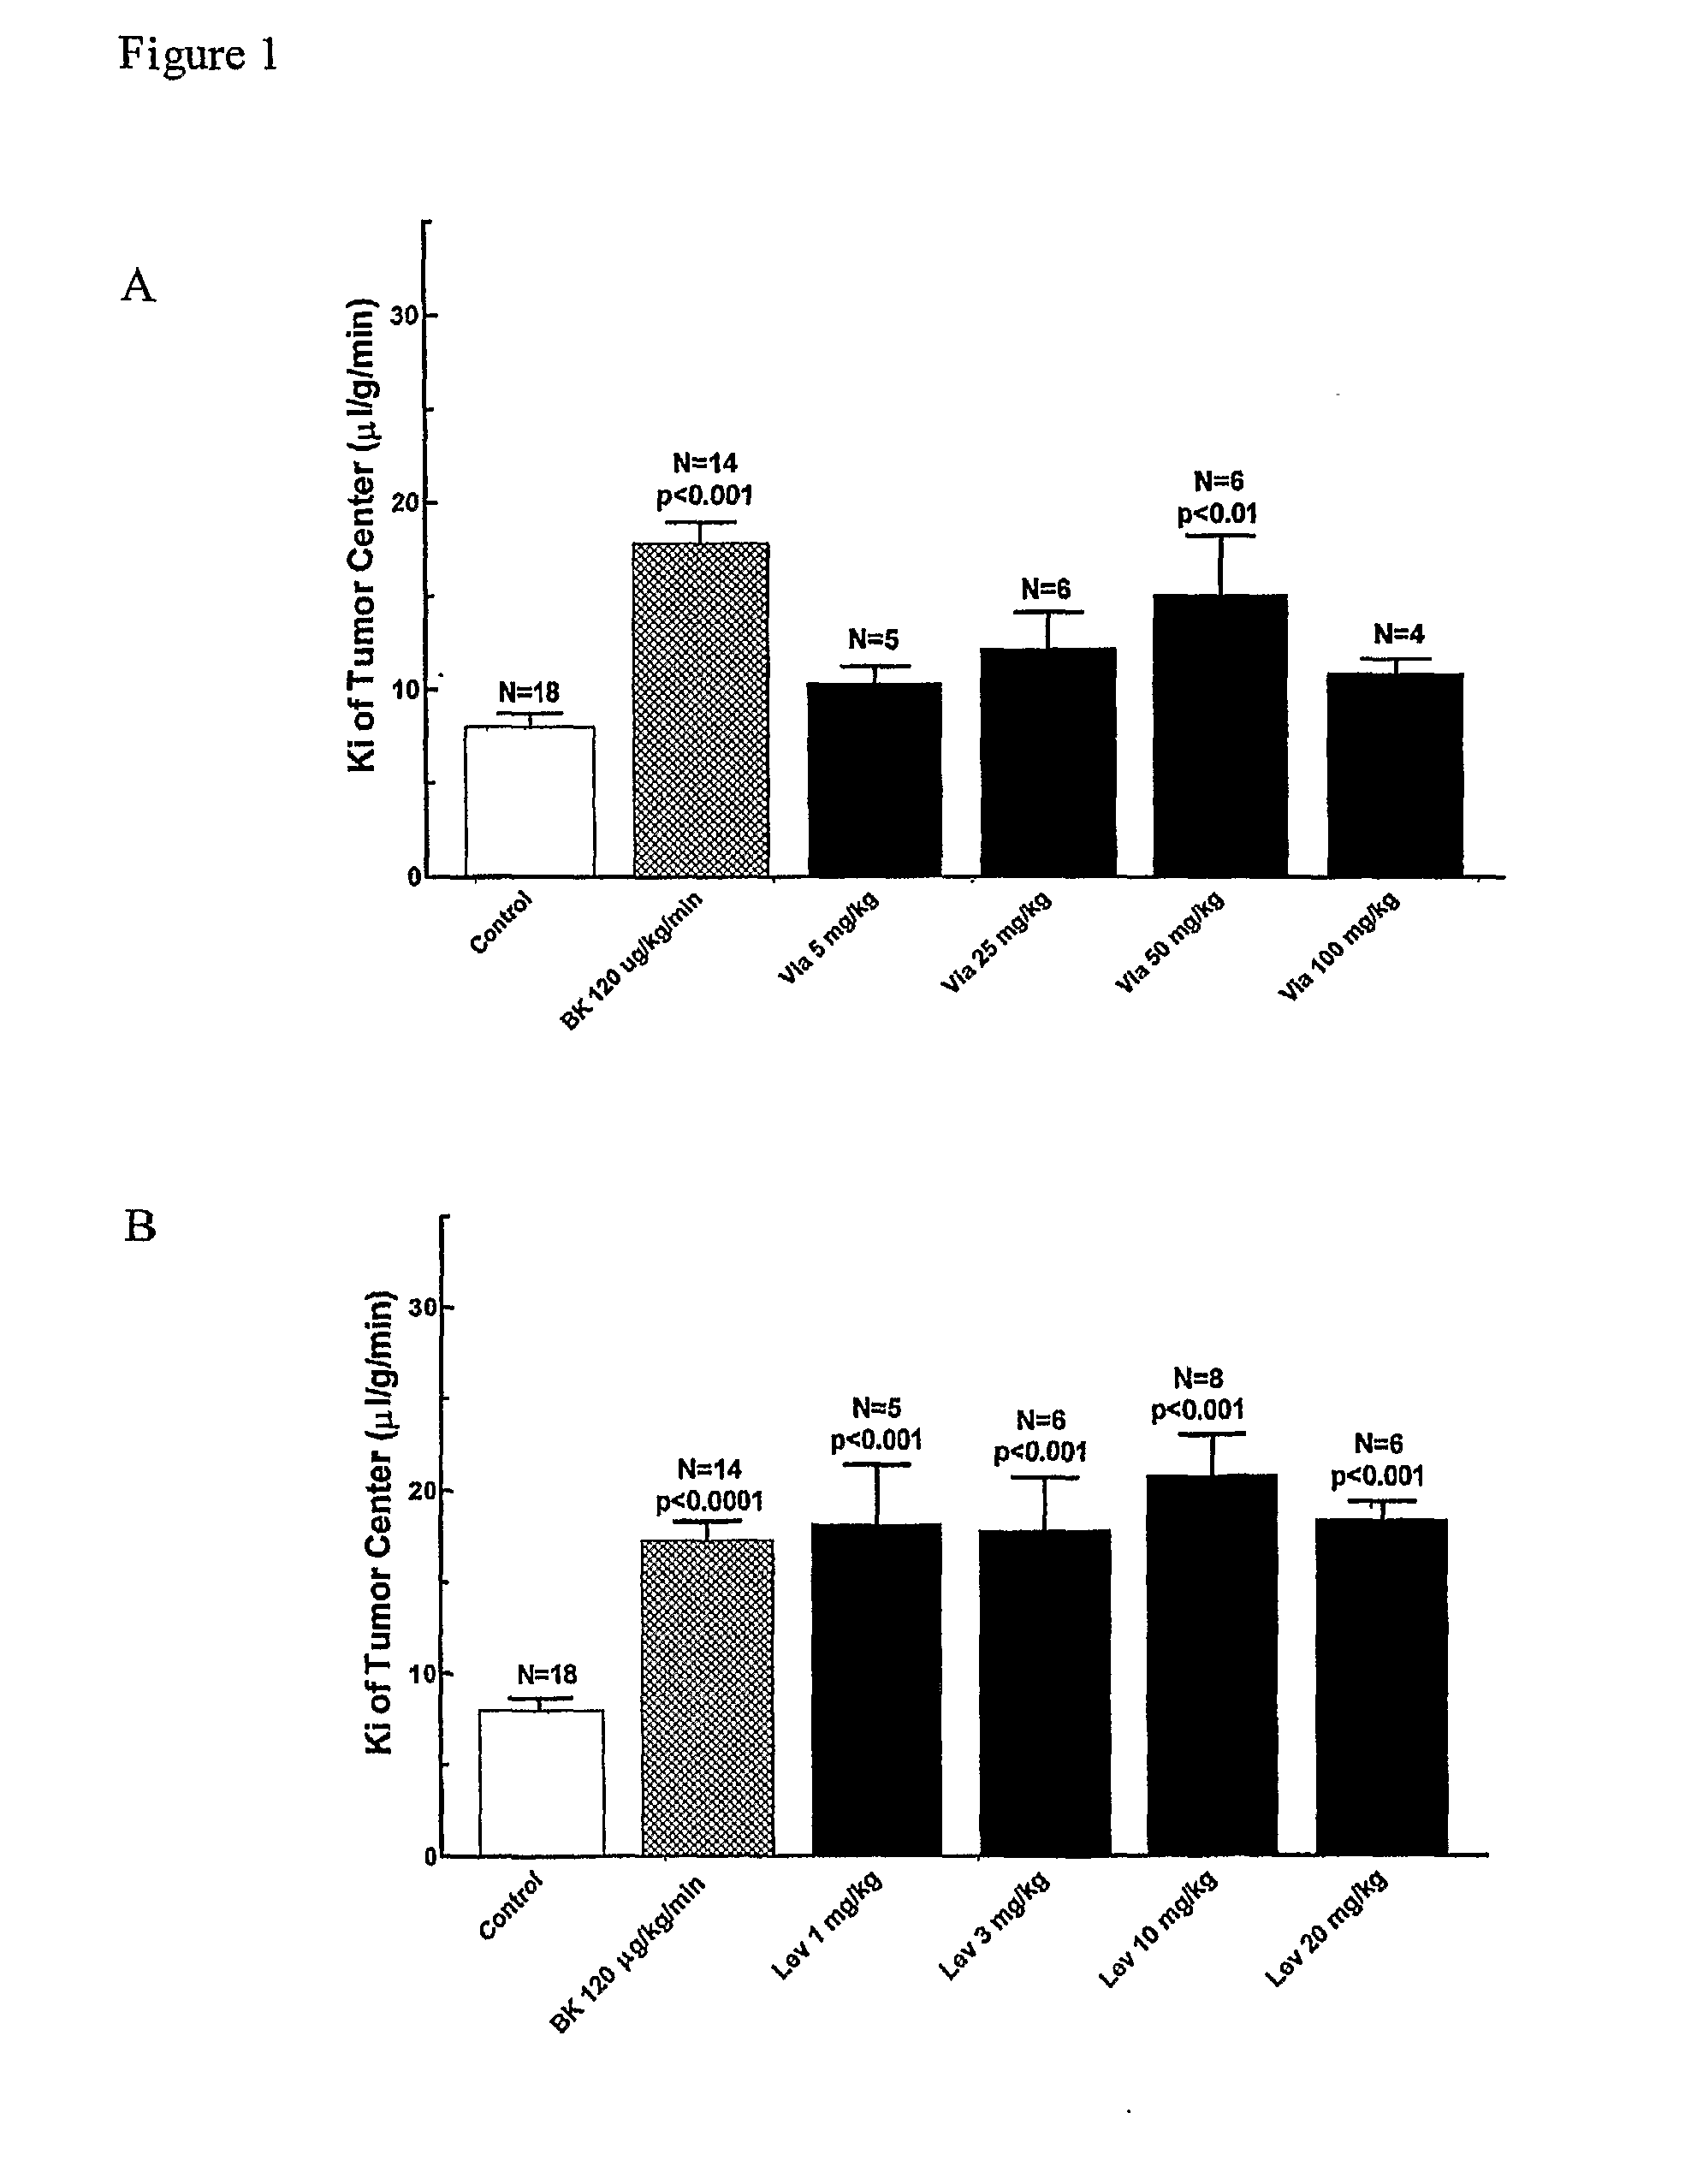 Use of Sildenafil, Vardenafil and Other 5-Phosphodiesterase Inhibitors to Enhance Permeability of the Abnormal Blood-Brain Barrier